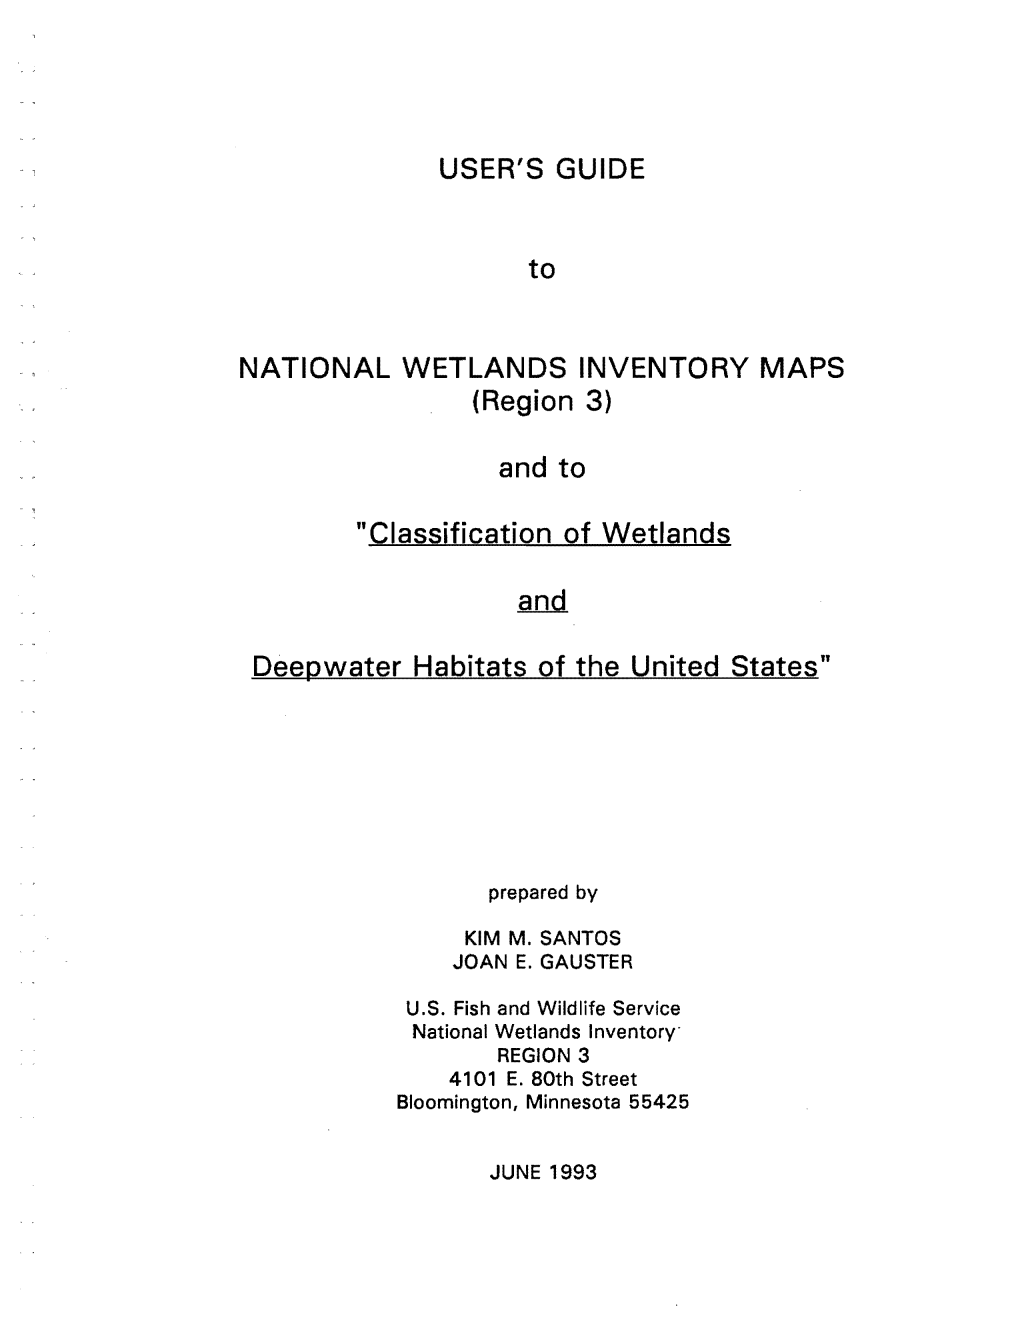 User's Guide to National Wetlands Inventory Maps (Region 3)